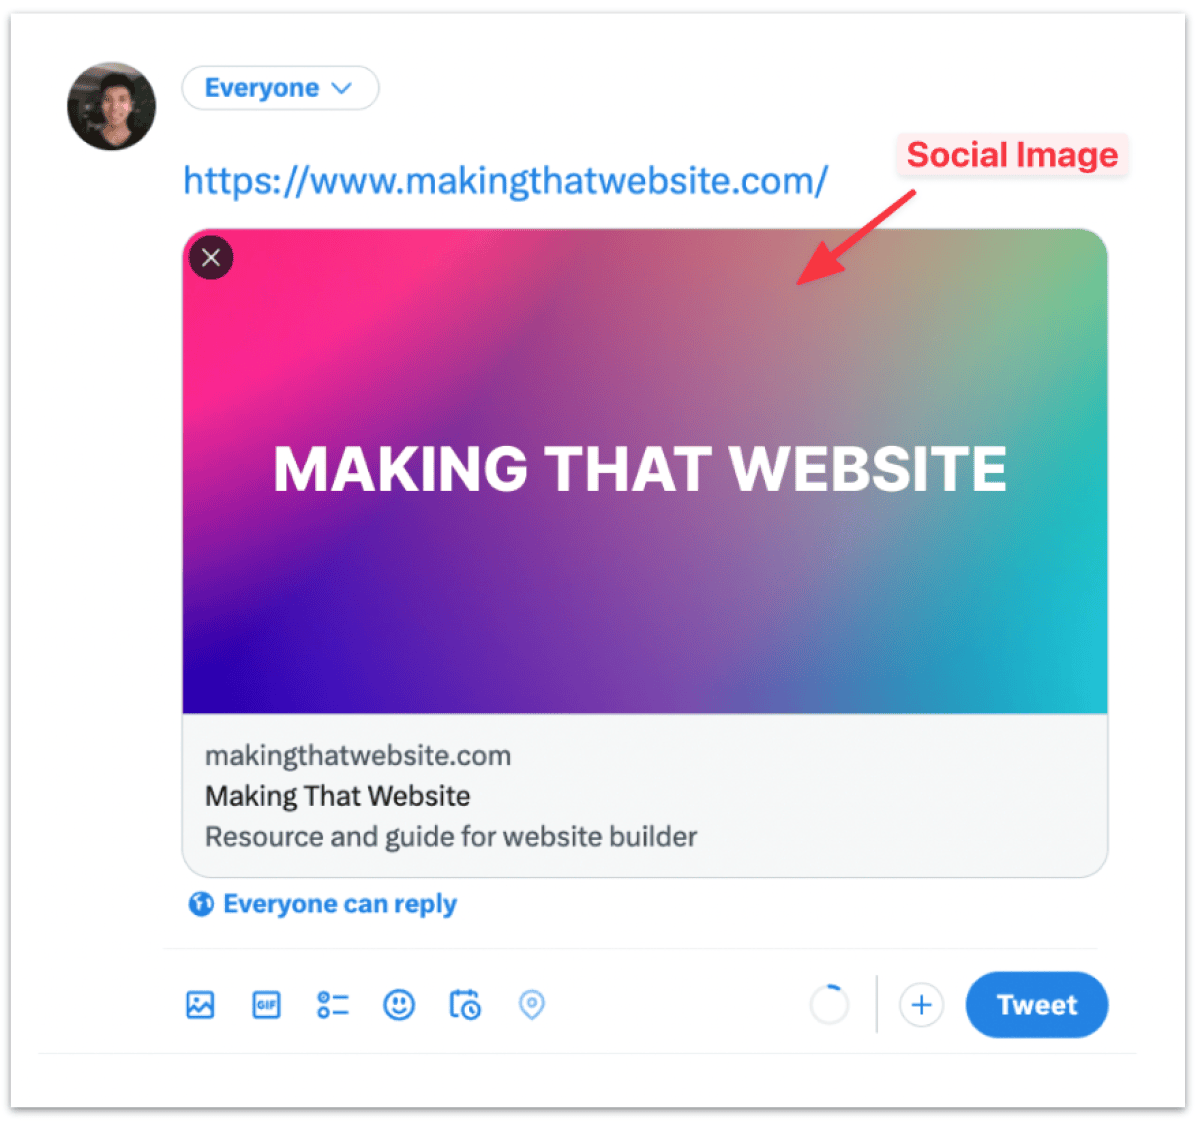 Preview of how social image will show on social media (Twitter)